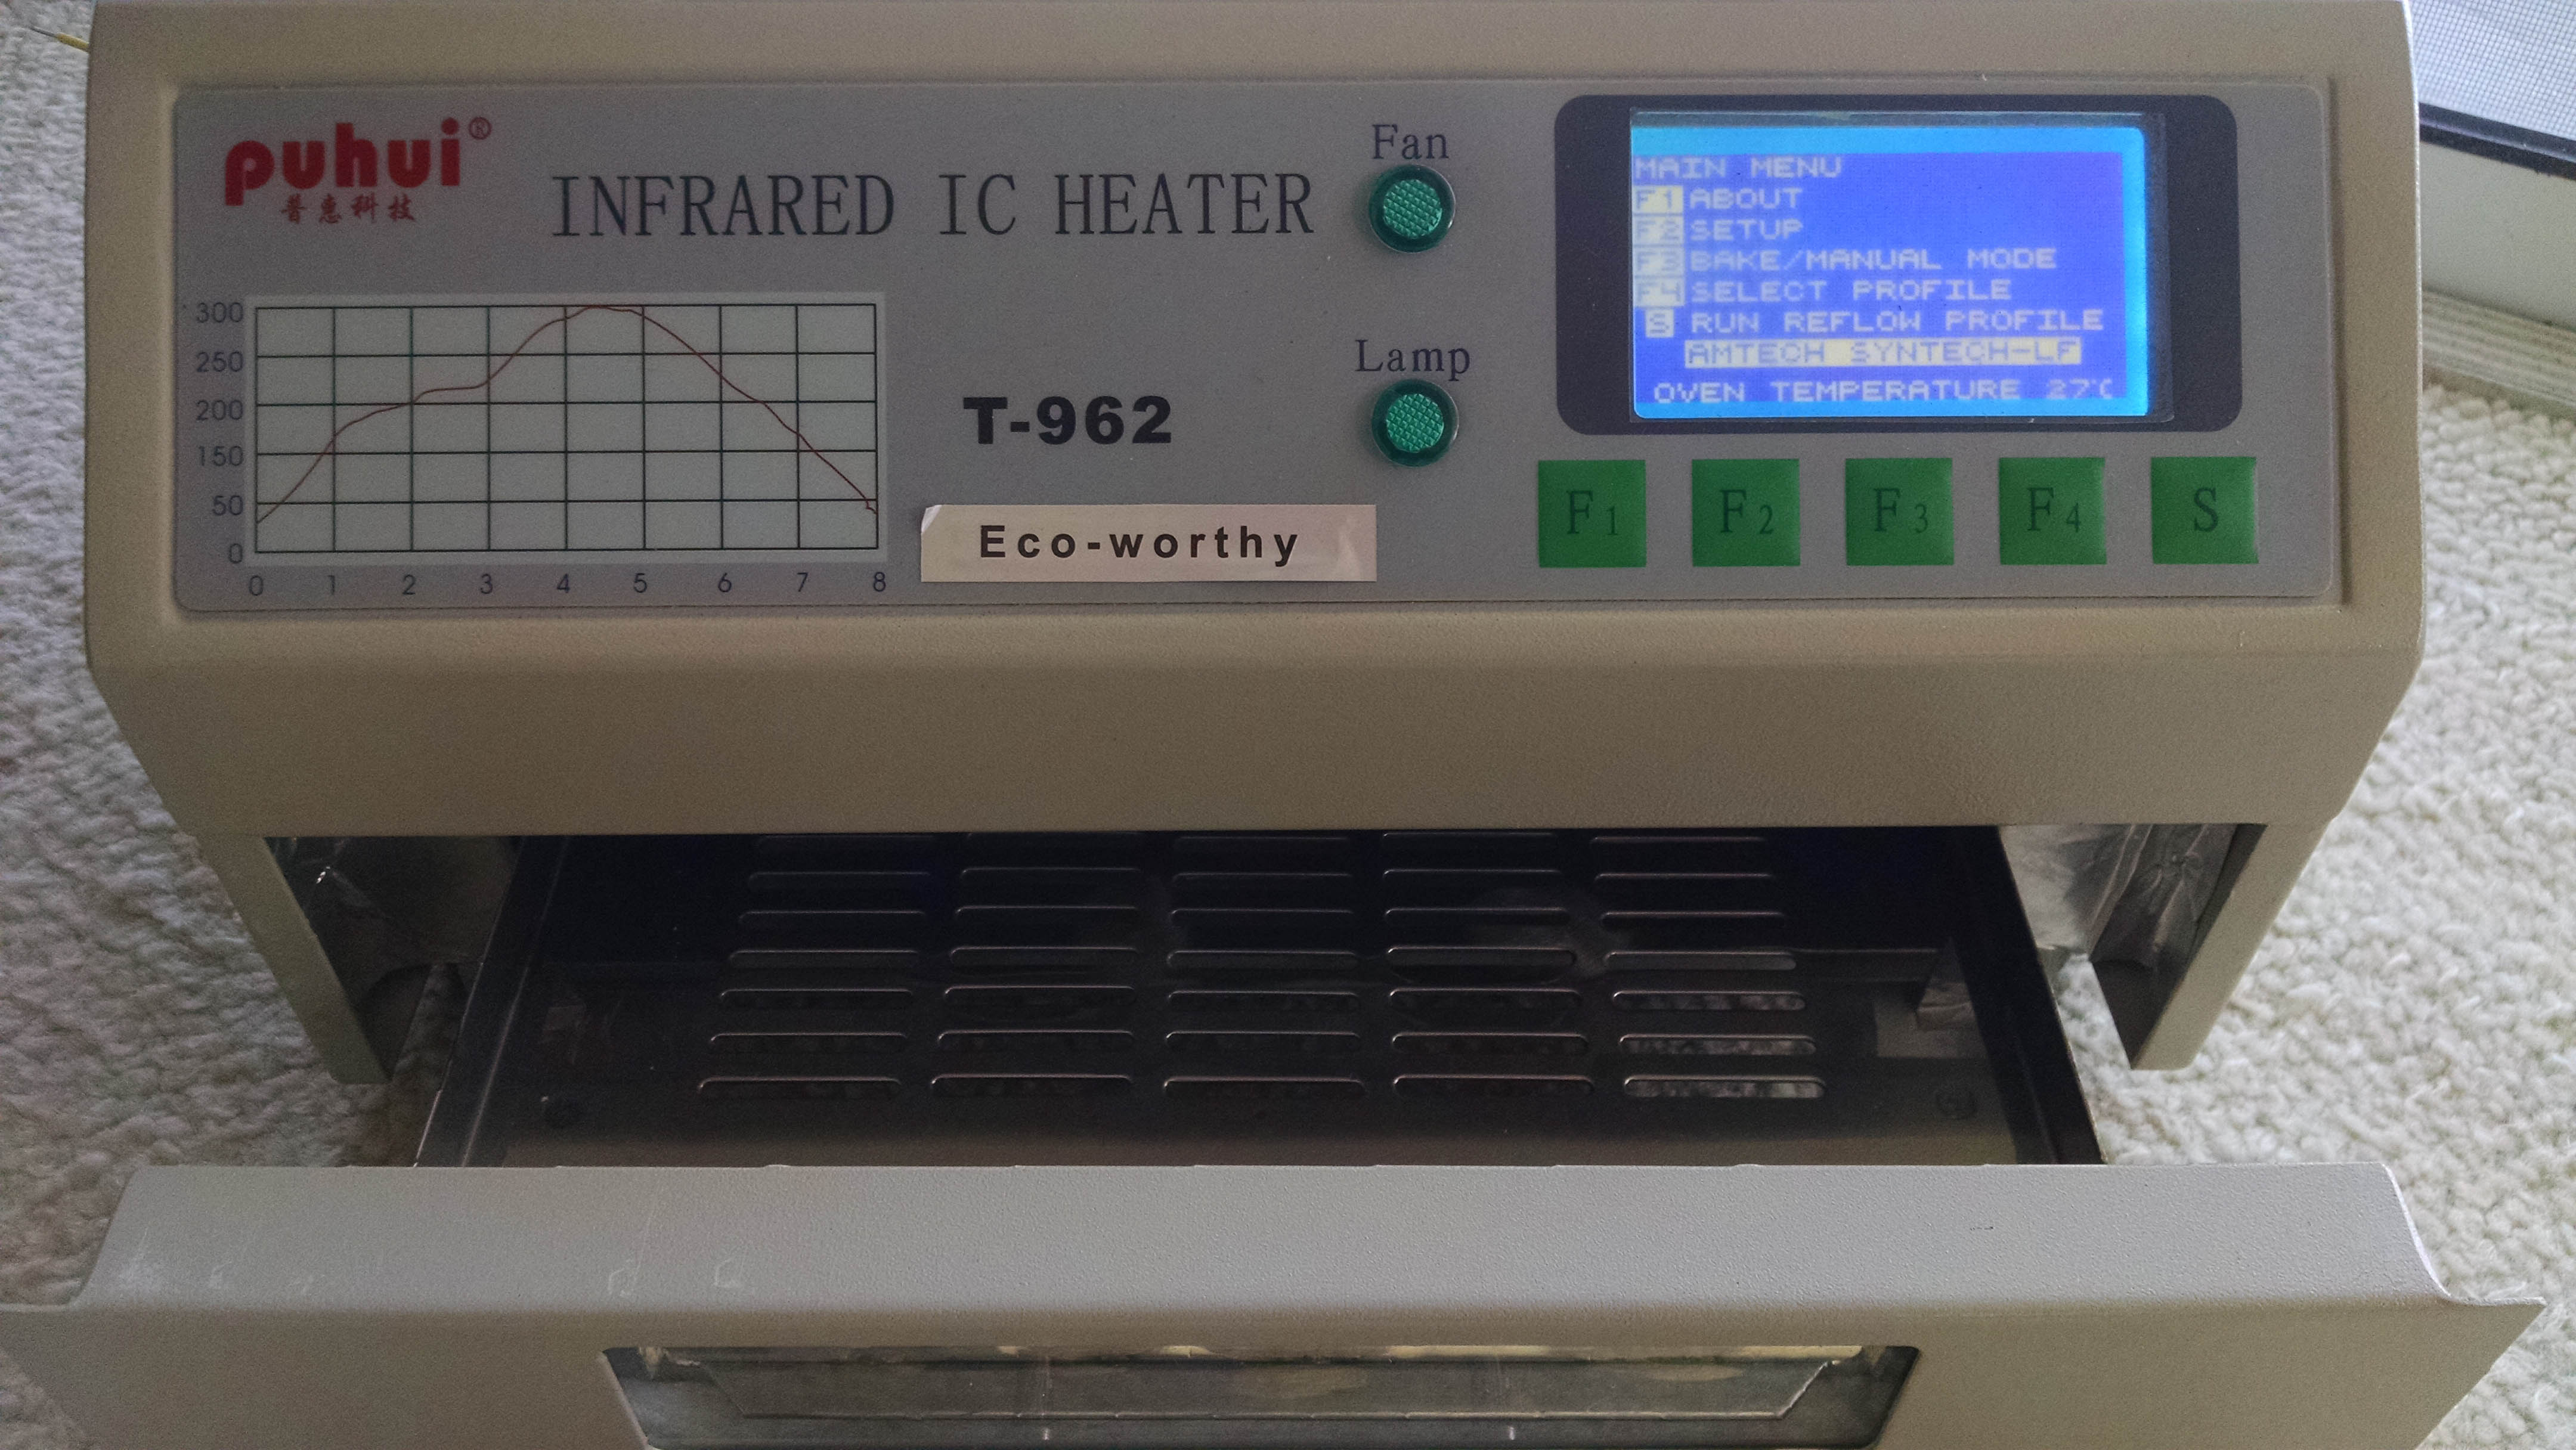 The Reflow Oven